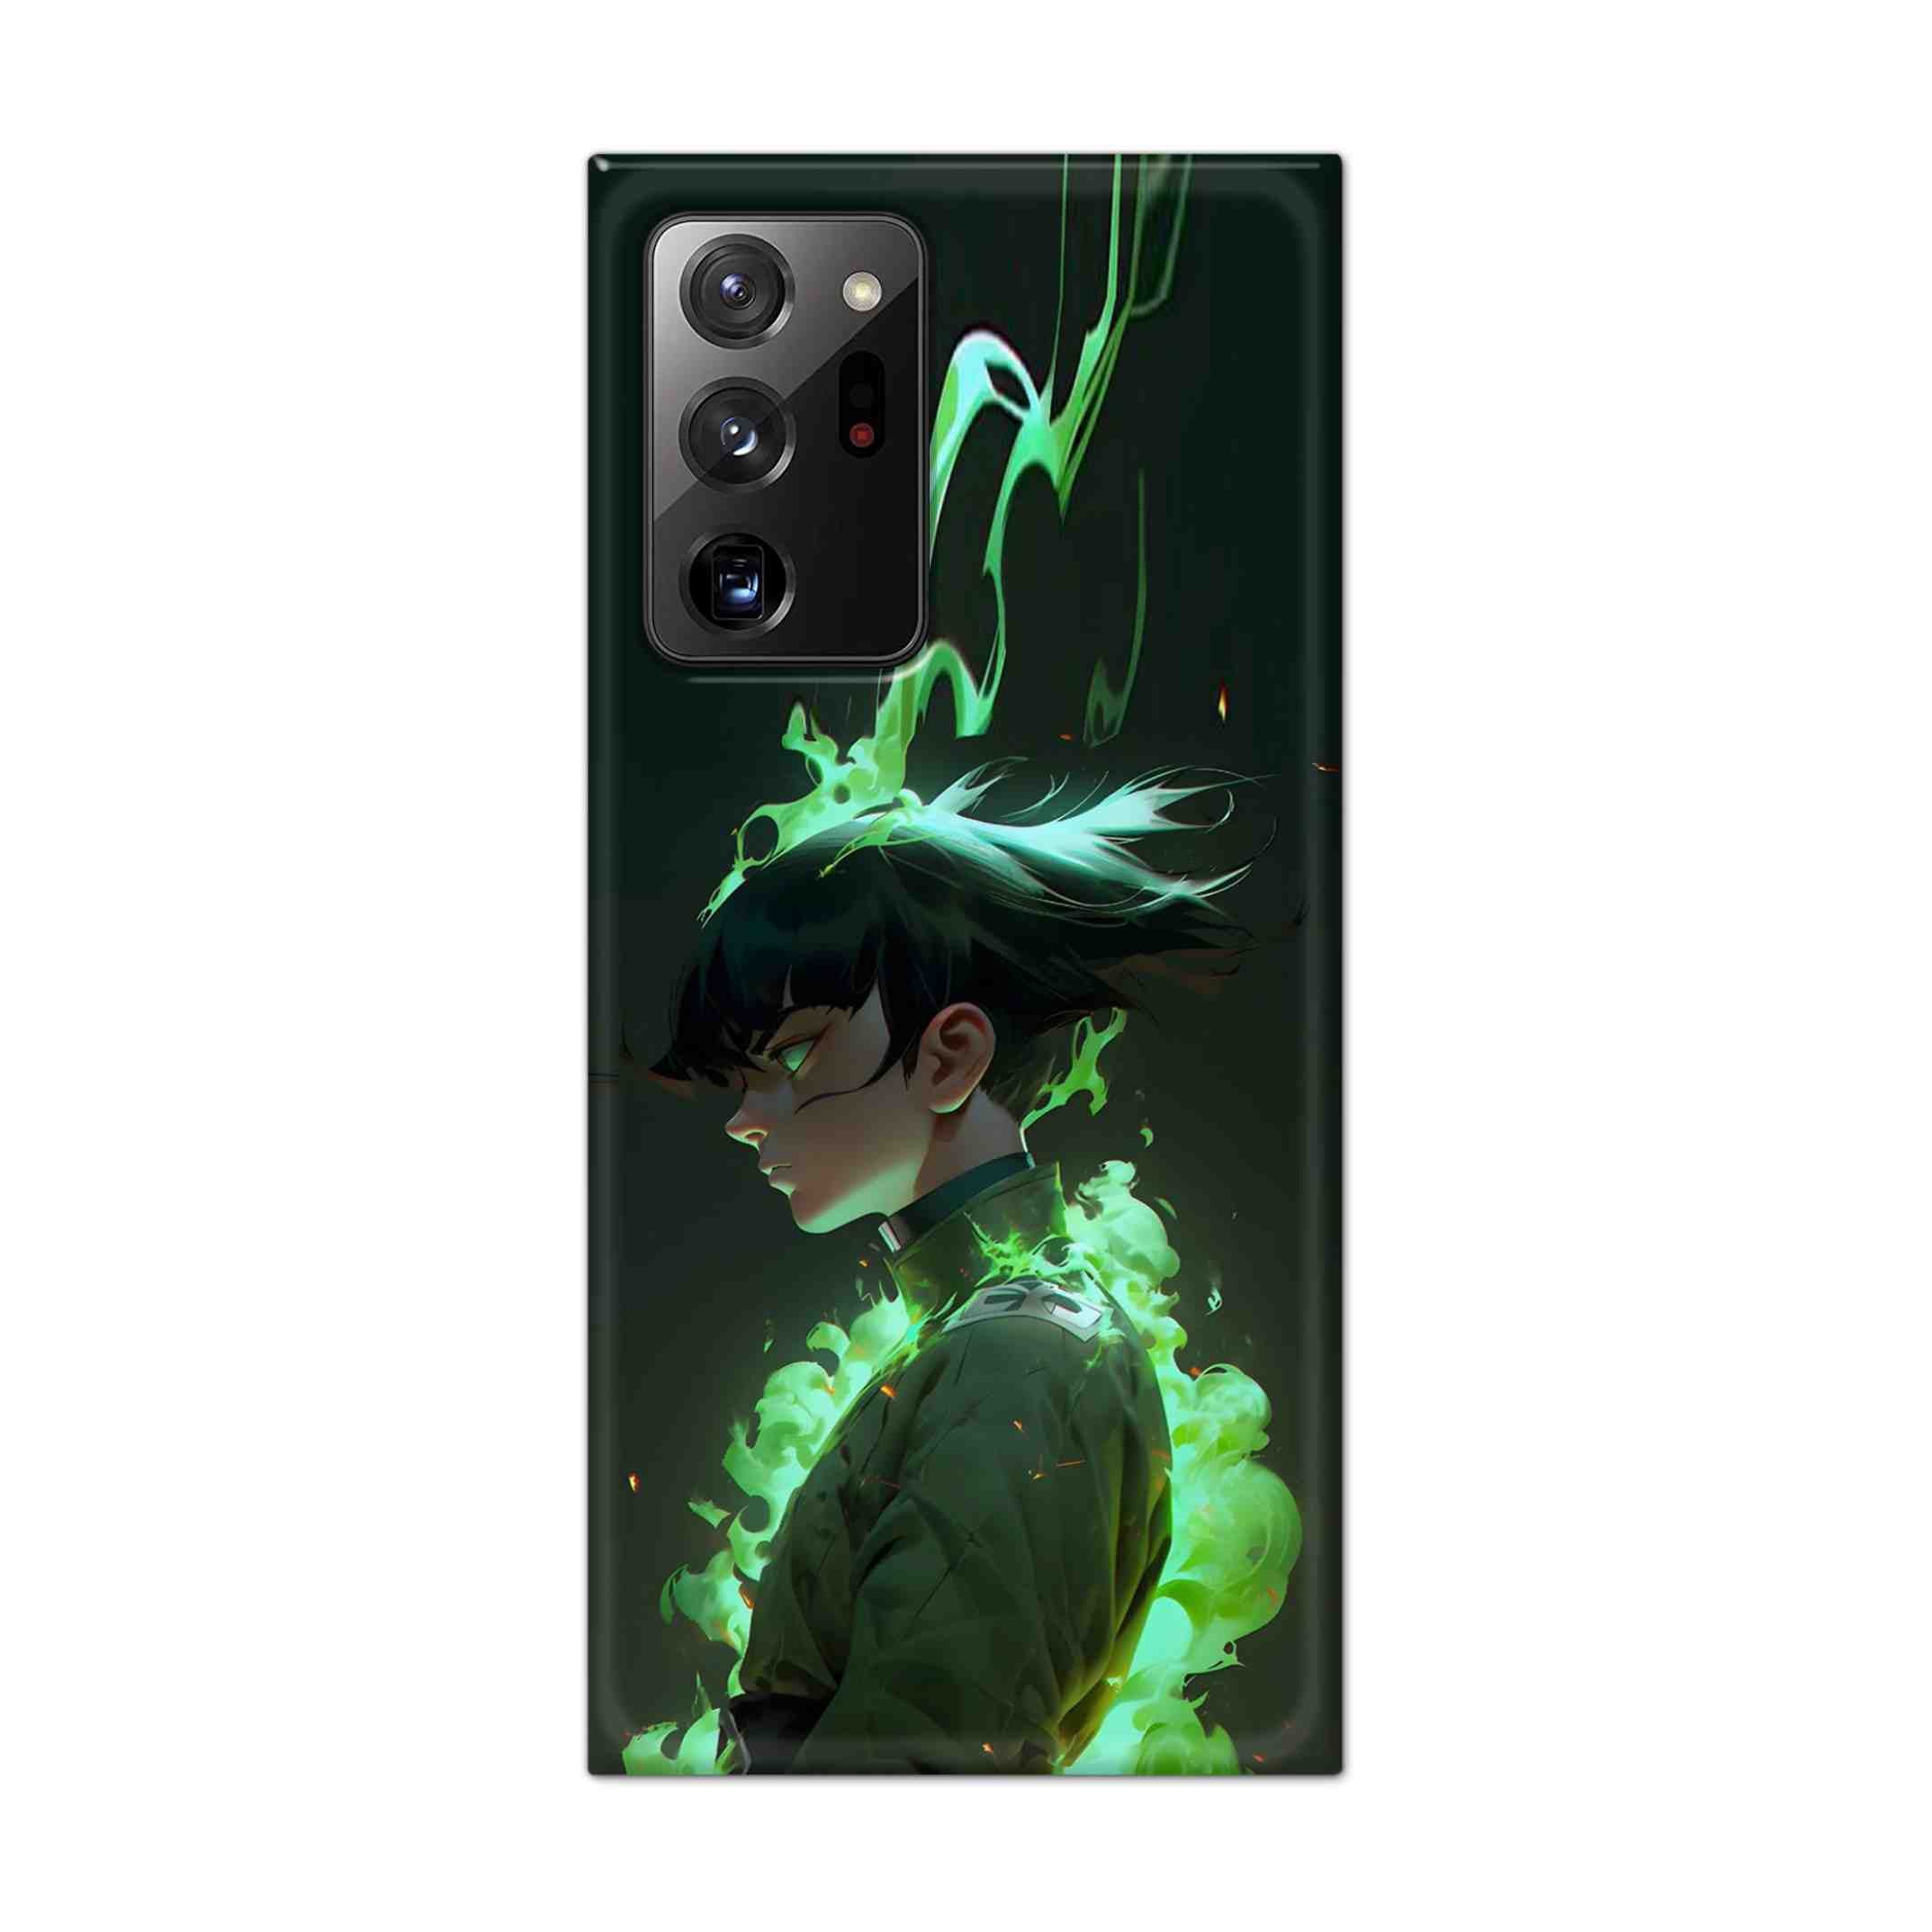 Buy Akira Hard Back Mobile Phone Case Cover For Samsung Galaxy Note 20 Ultra Online